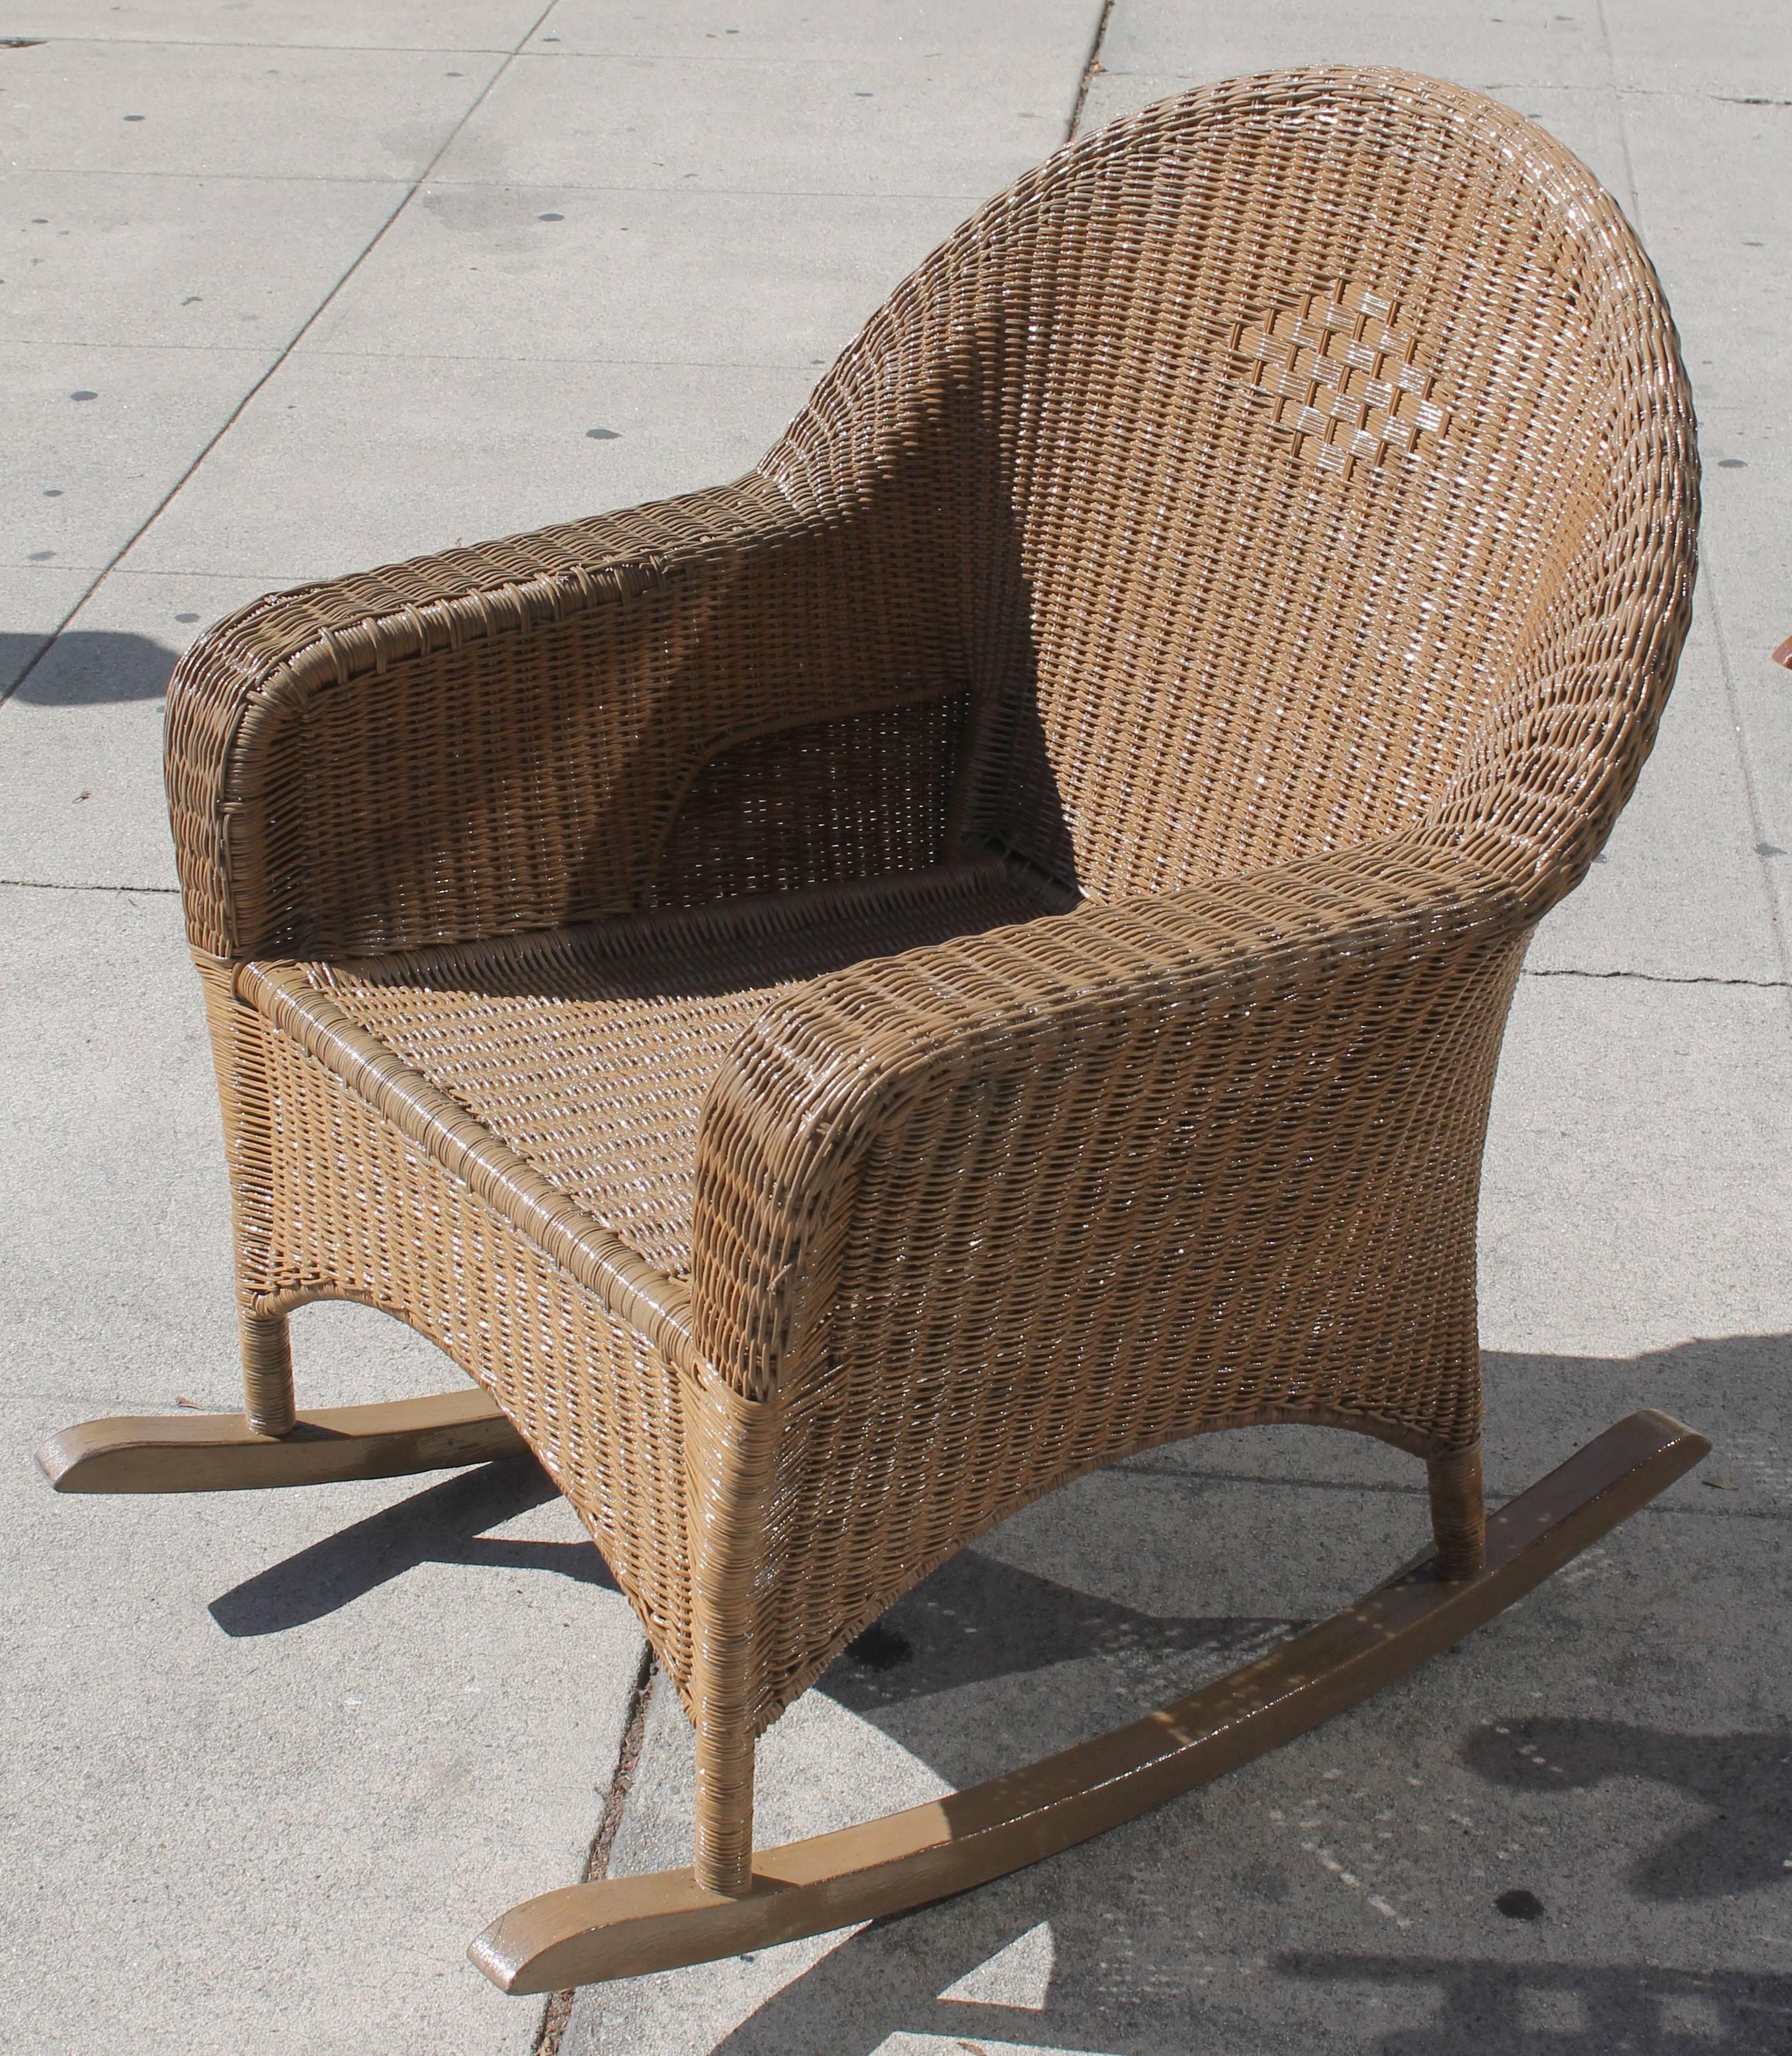 Beautiful light brown painted tan surface. Haywood wake field wicker rocker in strong and sturdy condition with a light varnish finish for outdoor all weather protection.